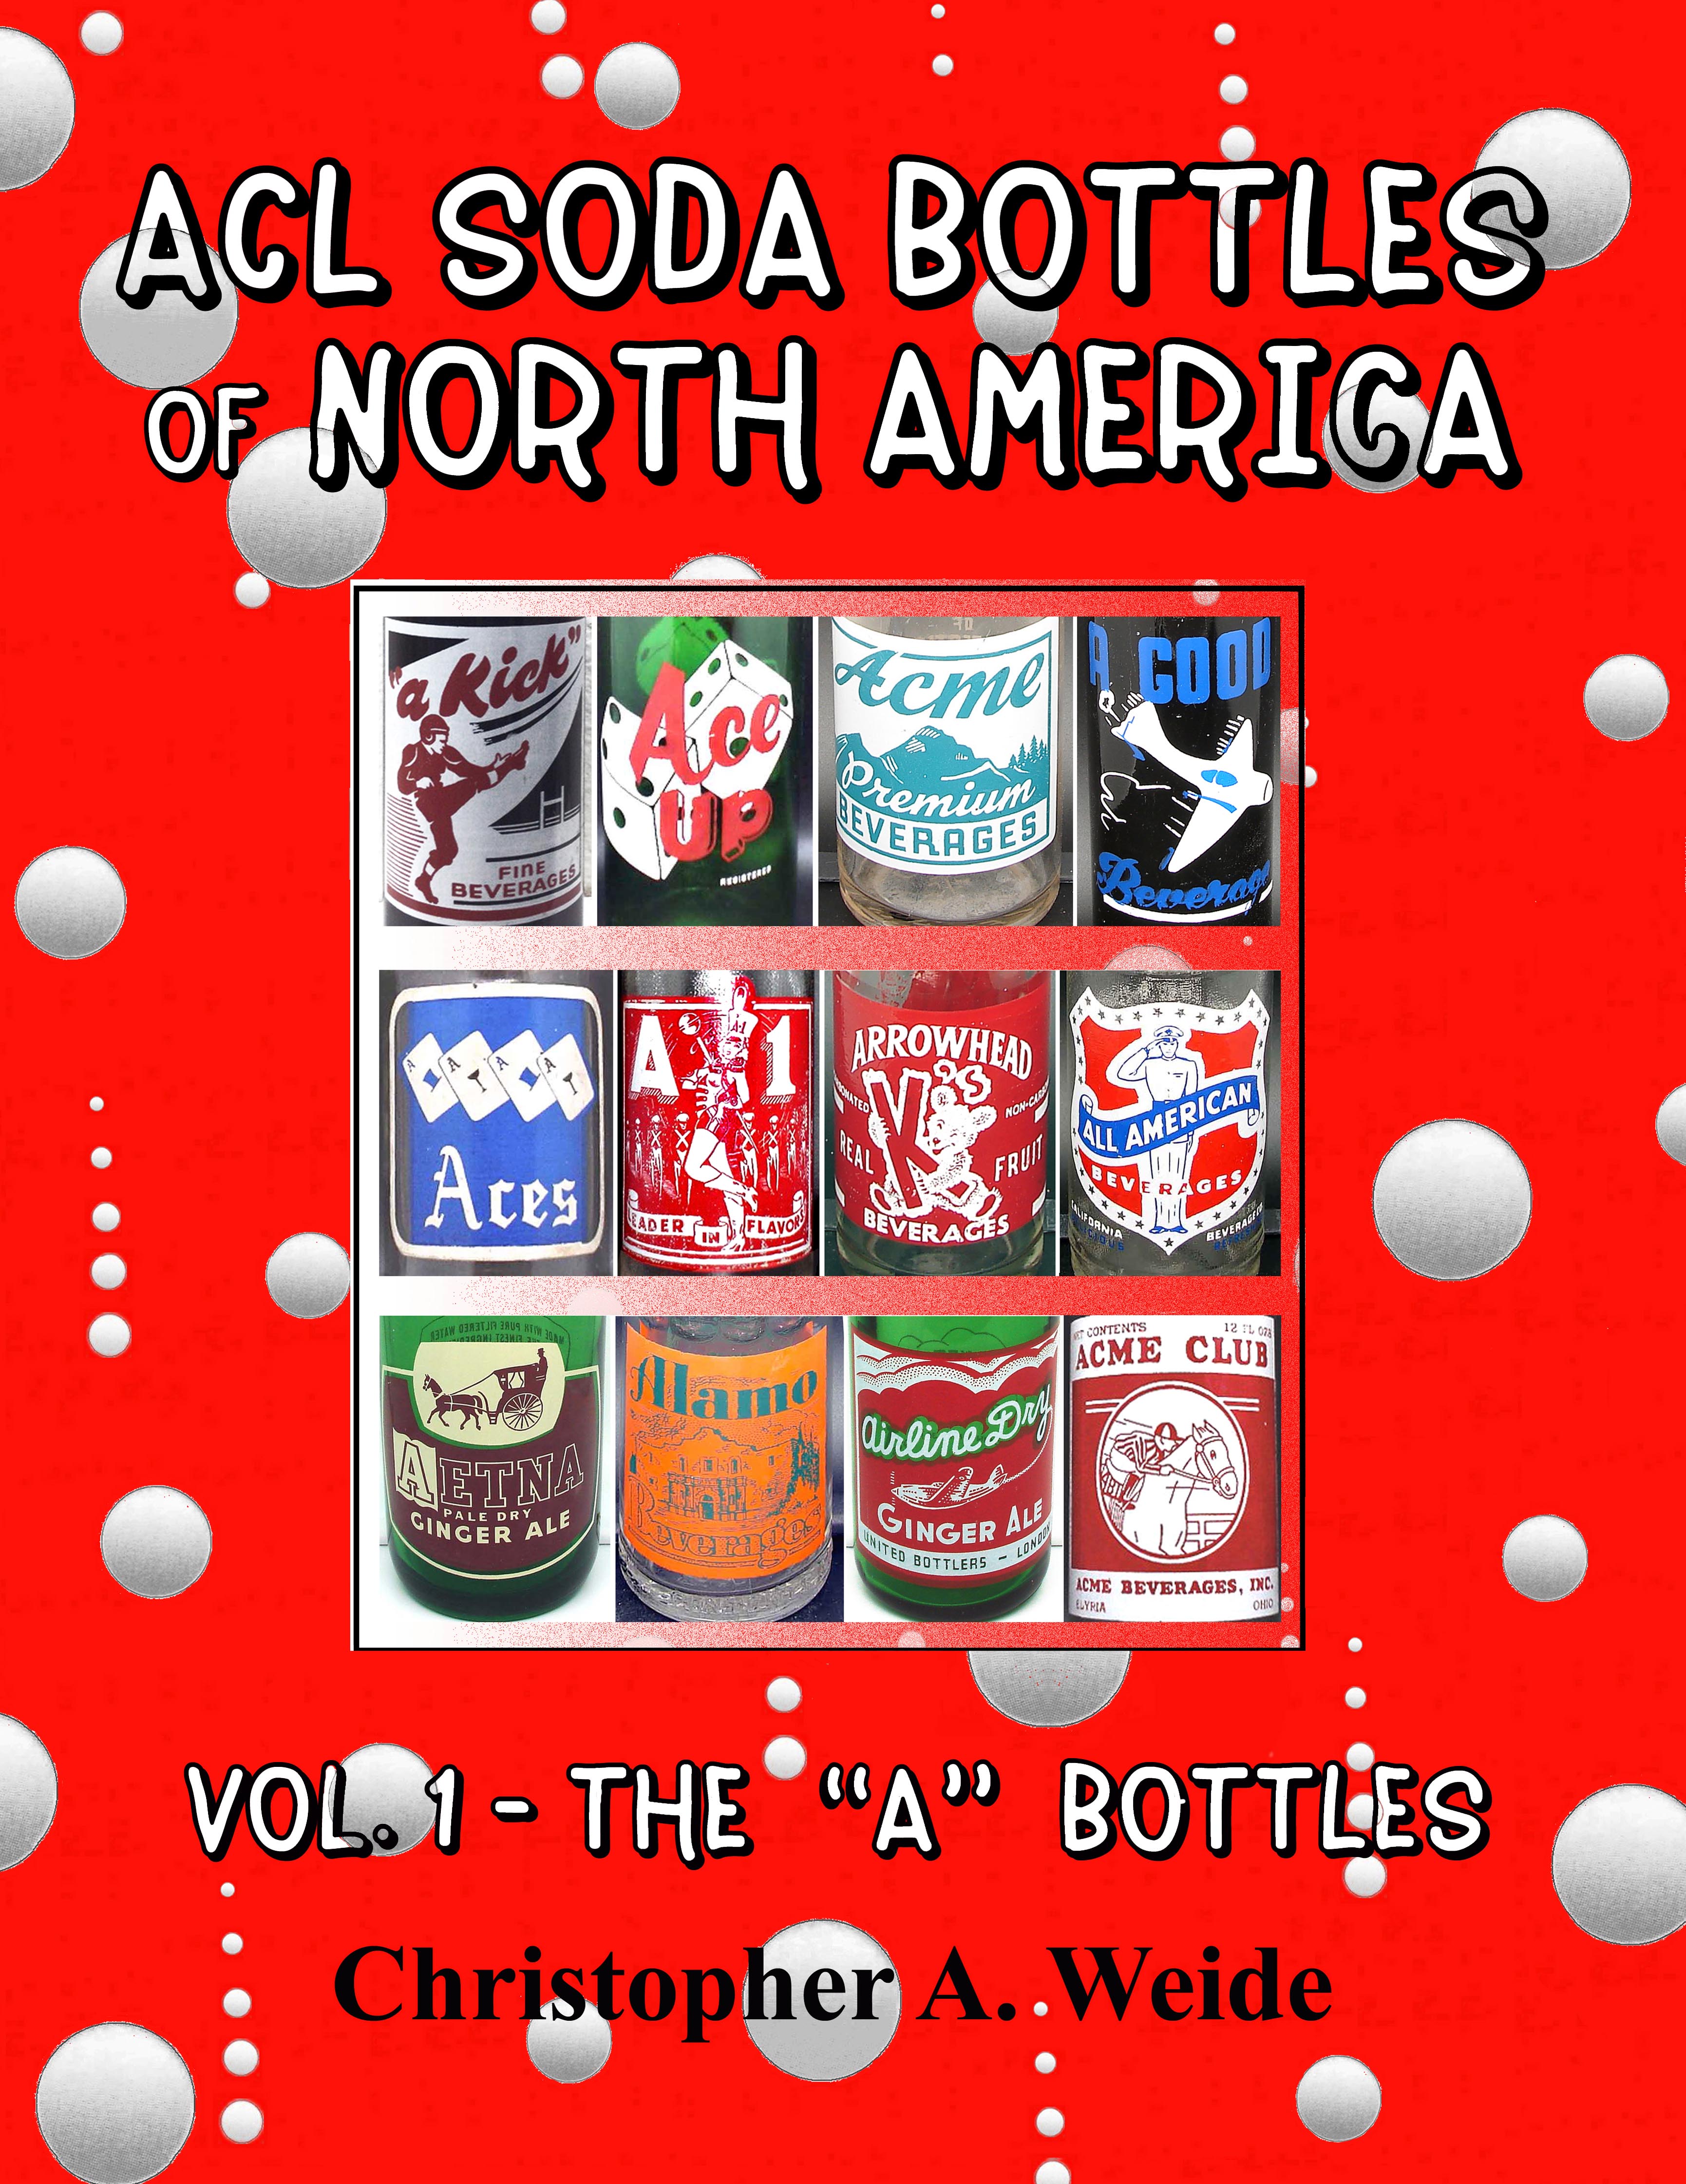 ACL Soda Bottles of North America - Vol. 1 the 'A' bottles